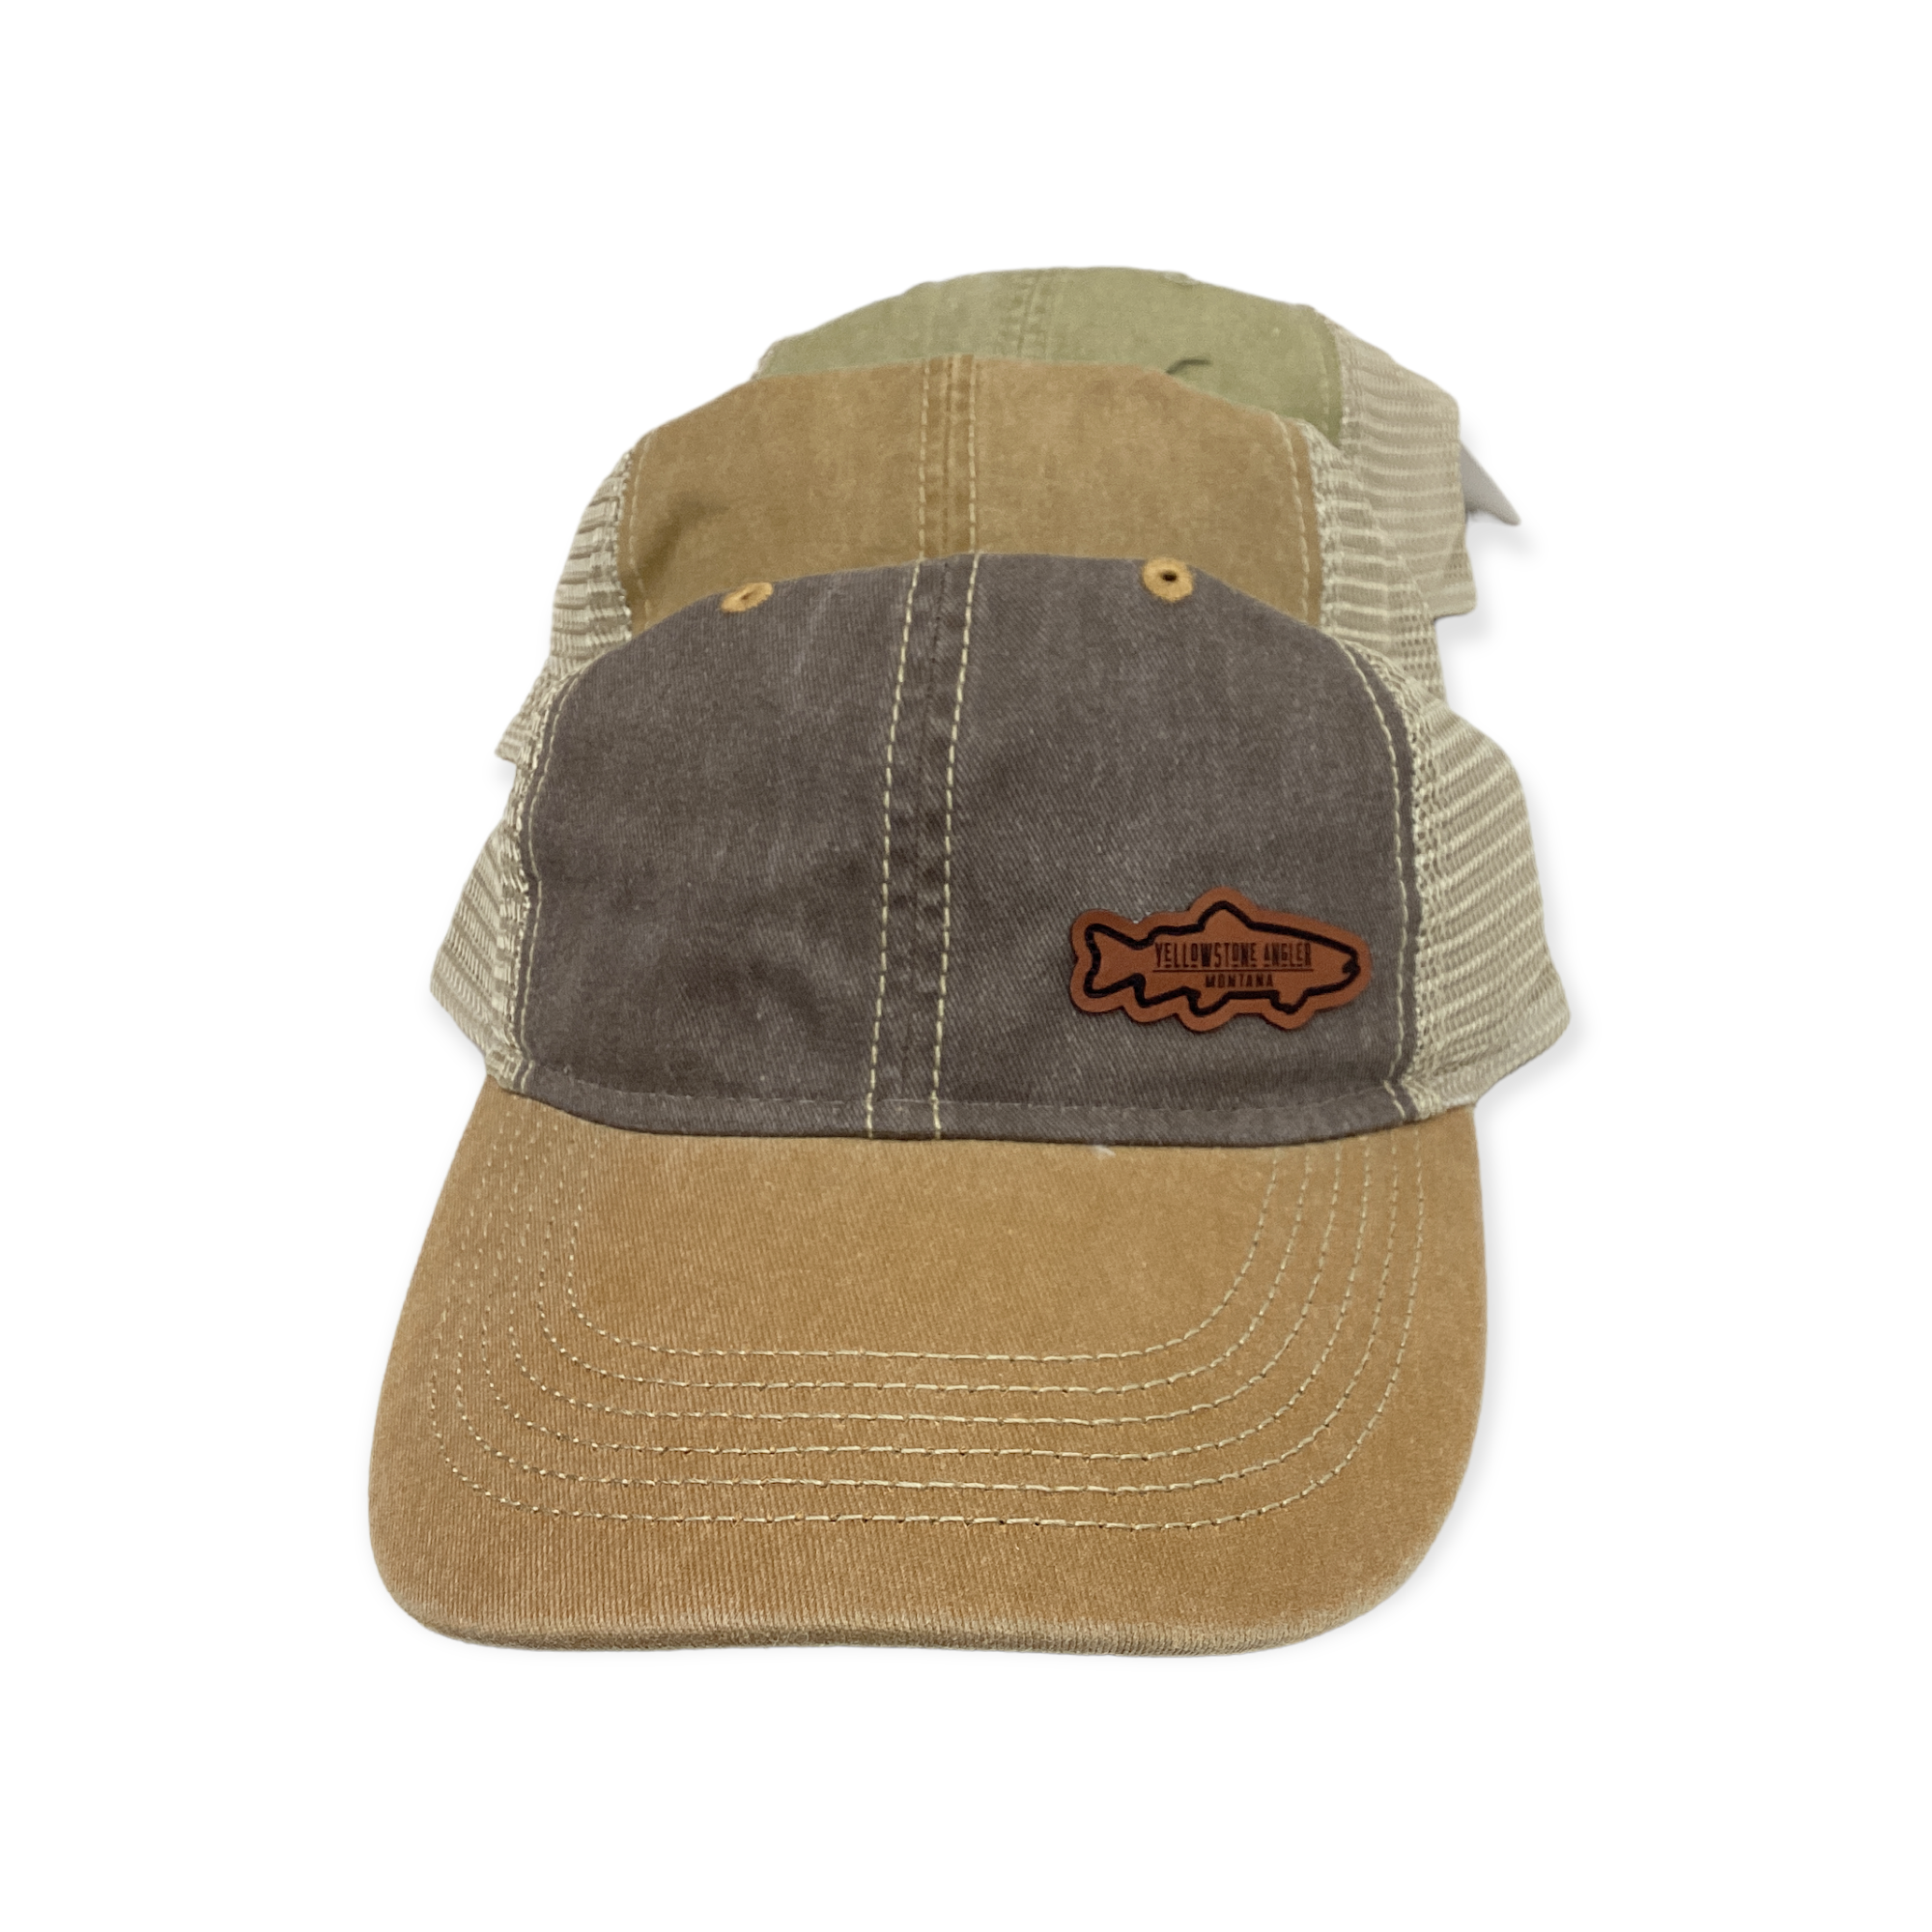 Trout Fishing Hat, Brown Trout Fly Fishing Hat, Fly Fisherman